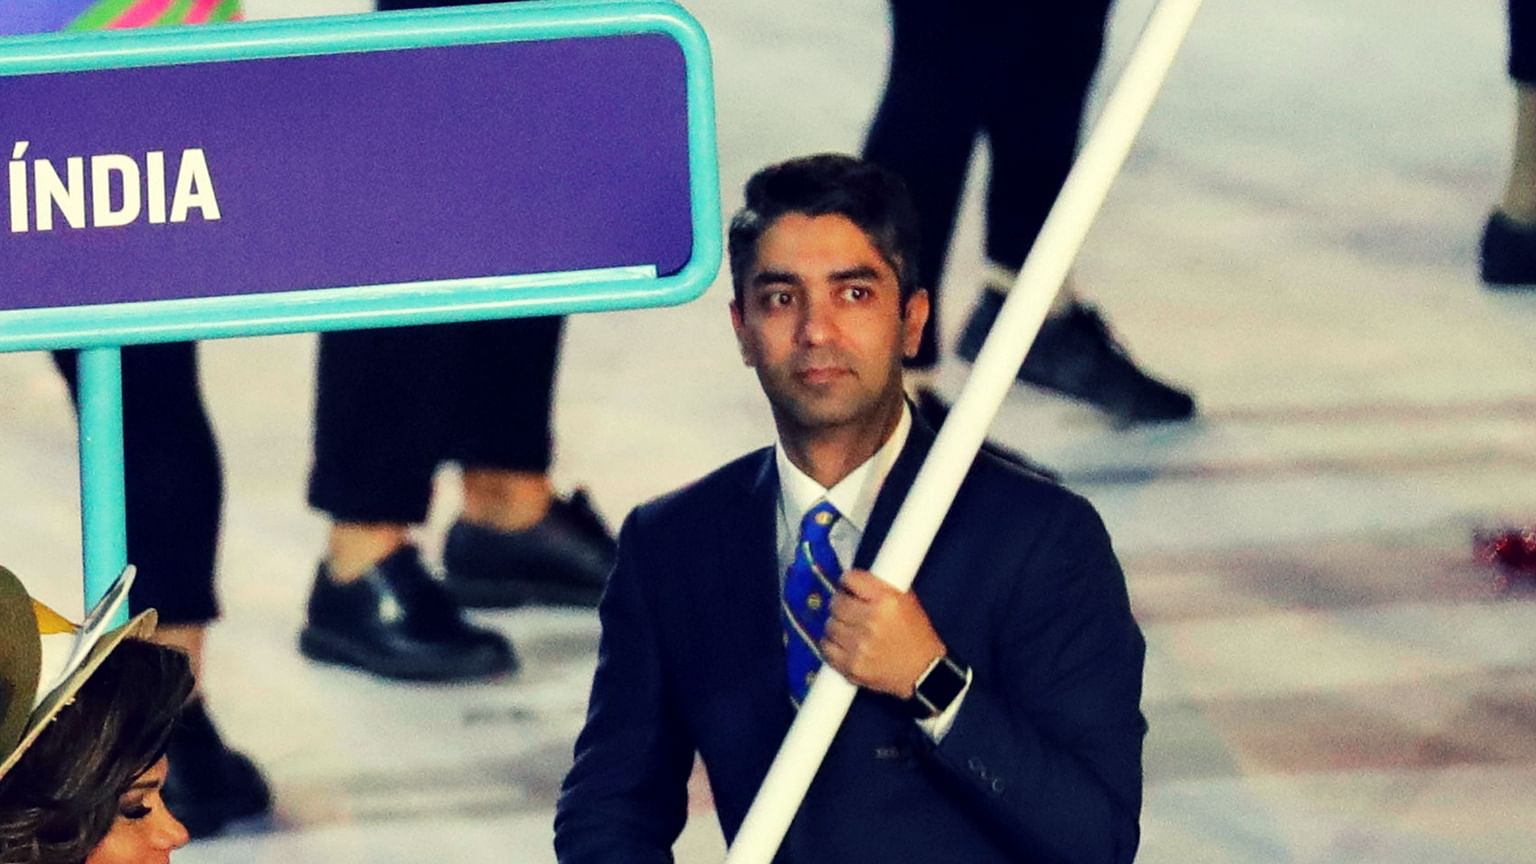 Abhinav Bindra carries the flag of India during the opening ceremony for the 2016 Summer Olympics in Rio de Janeiro, Brazil. (Photo: AP)